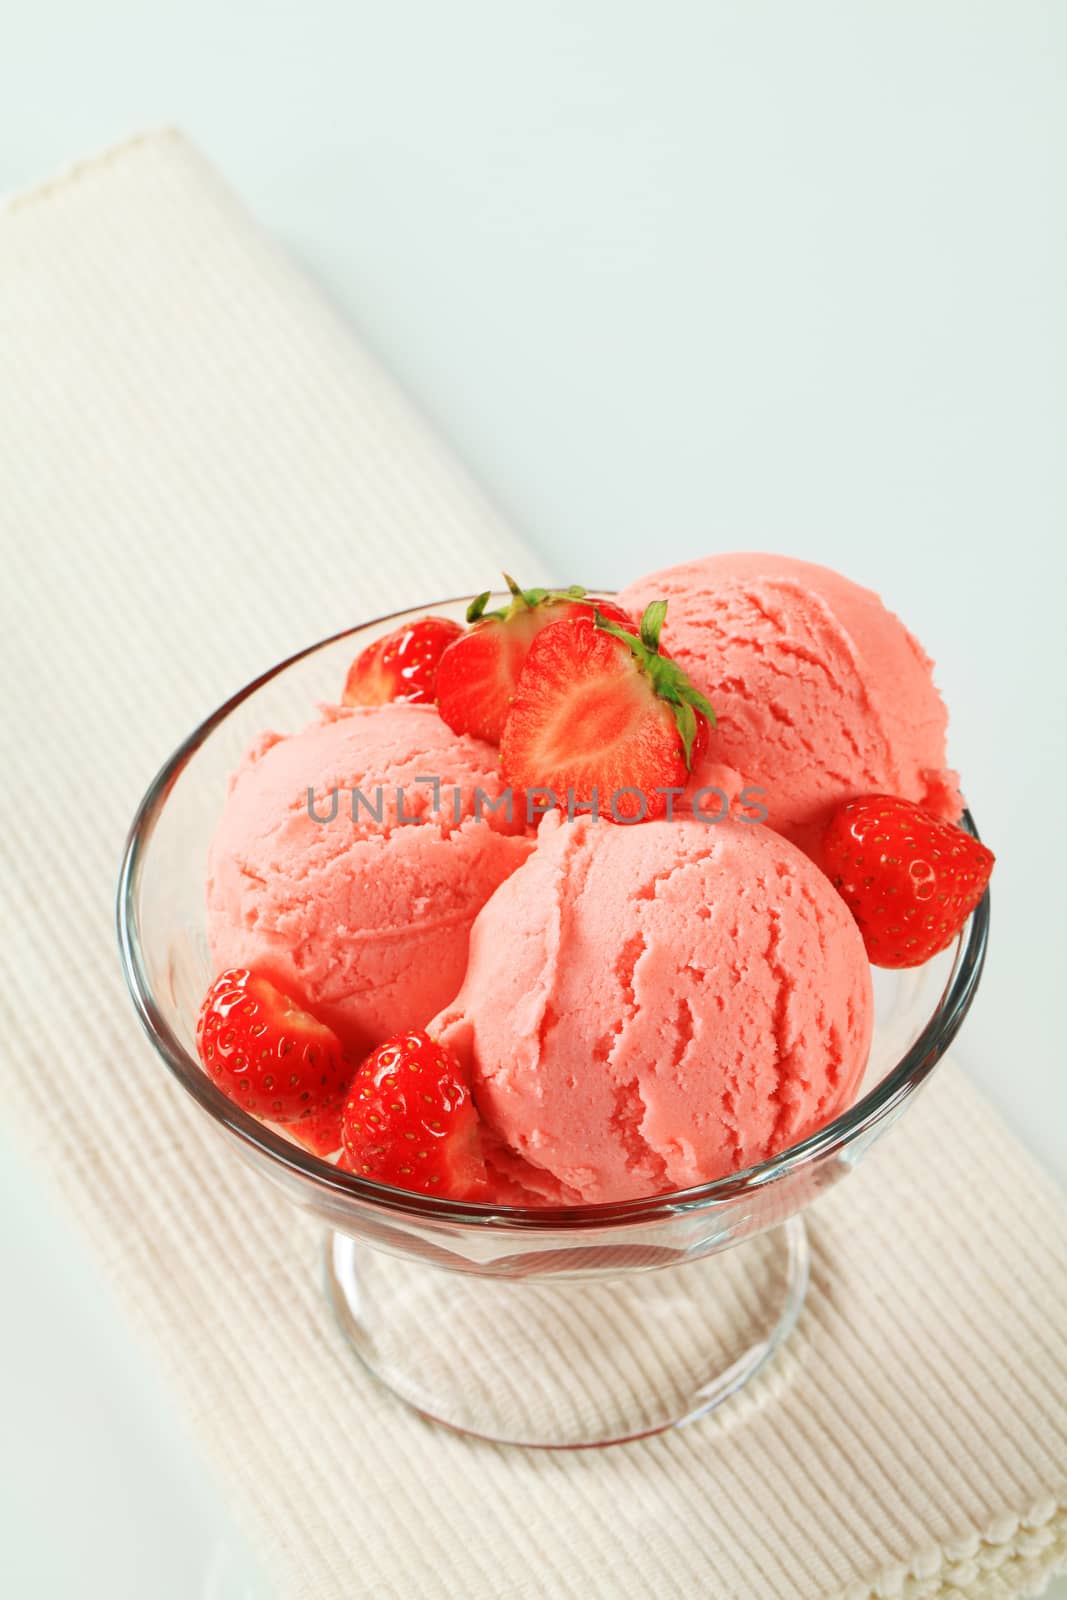 Ice cream with fresh strawberries by Digifoodstock